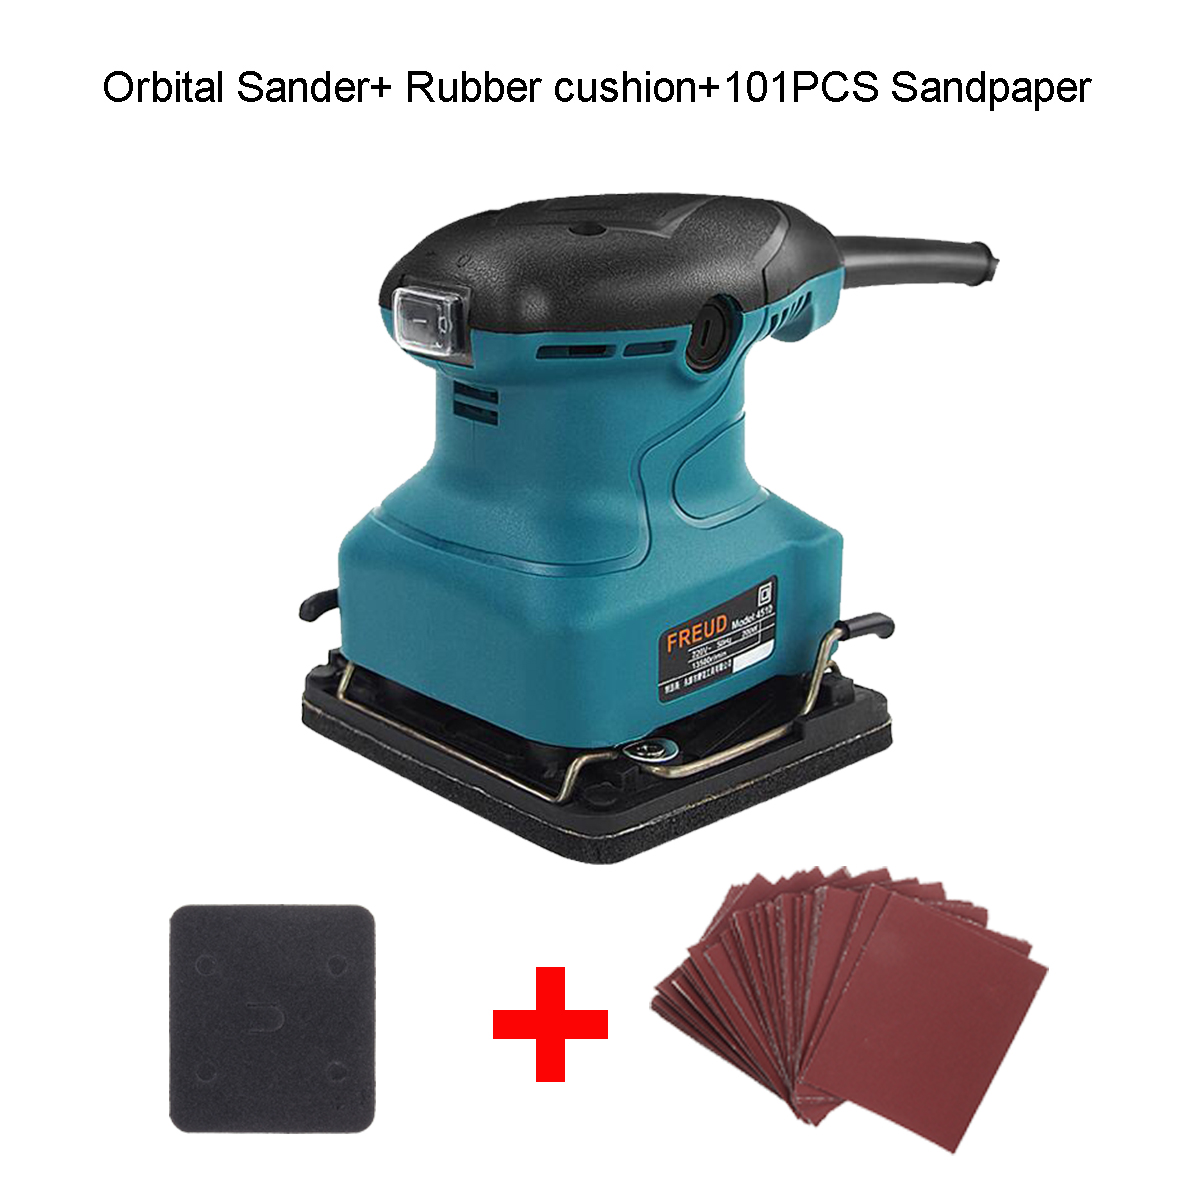 Electric flexible orbital sander Flexisander FS40070E 110 V, 15 x in, sands curved surfaces, fastening system with dust extraction, vehicle - 2